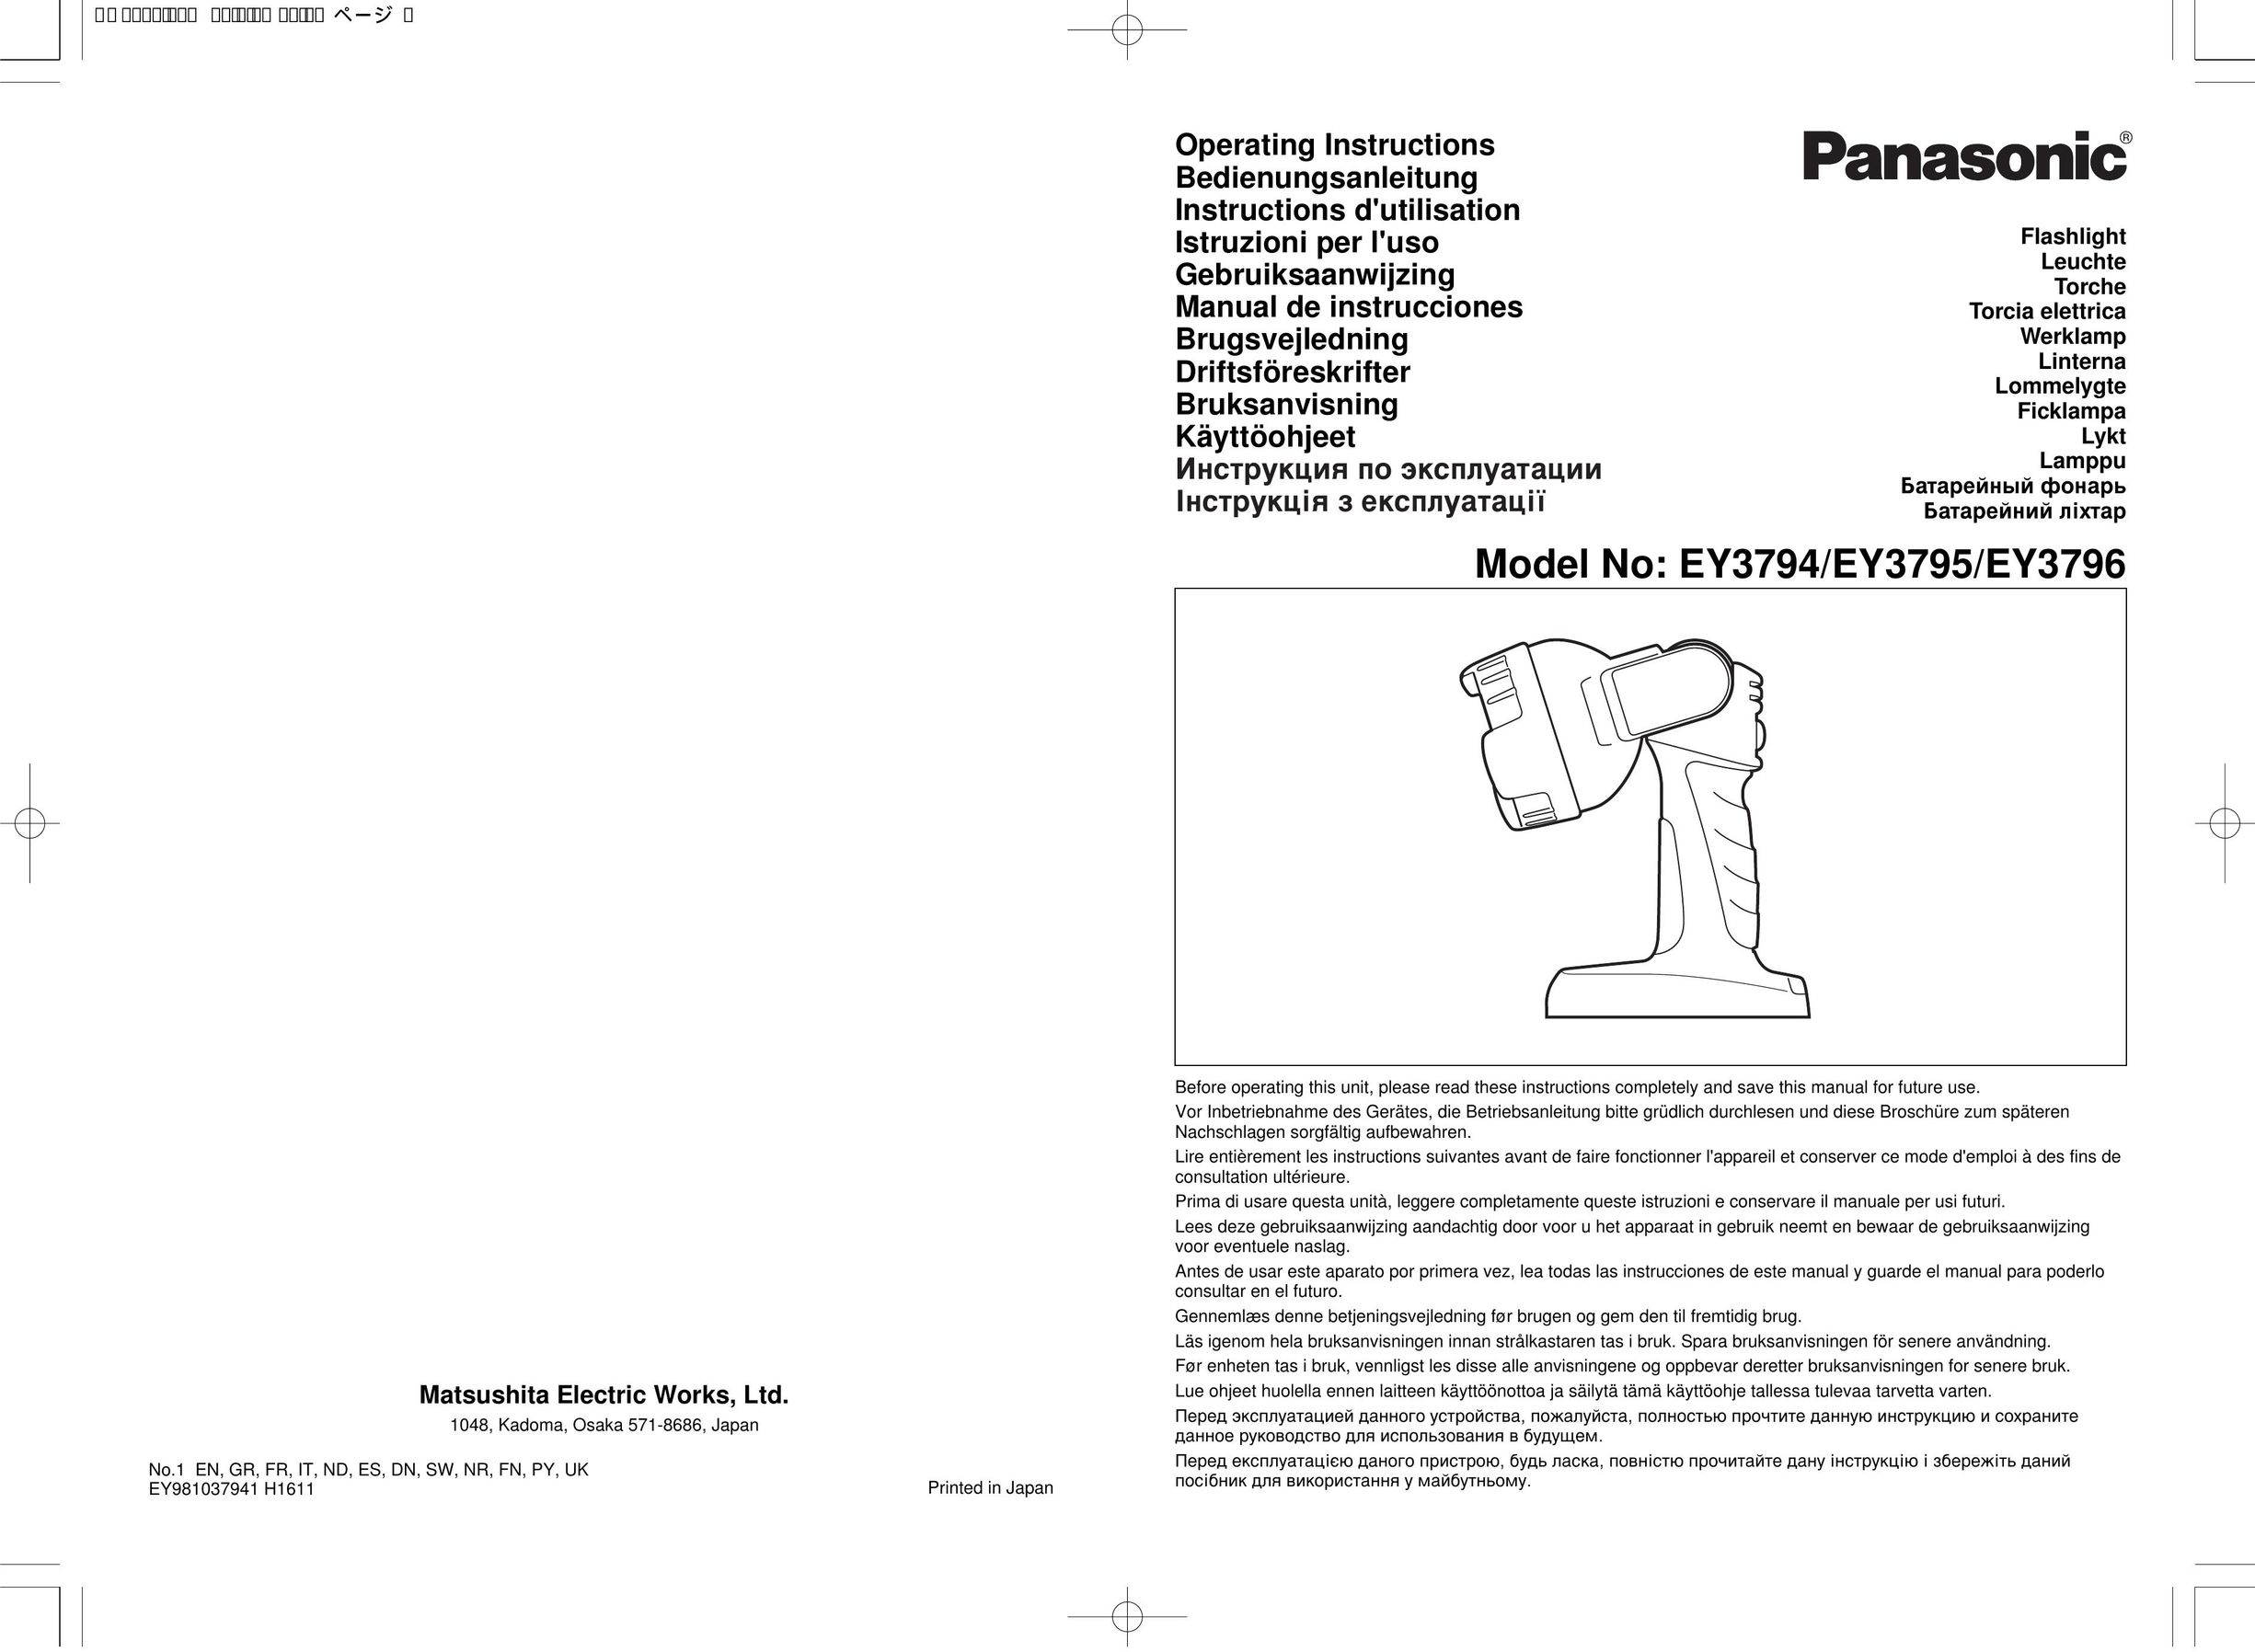 Panasonic EY3796 Home Safety Product User Manual